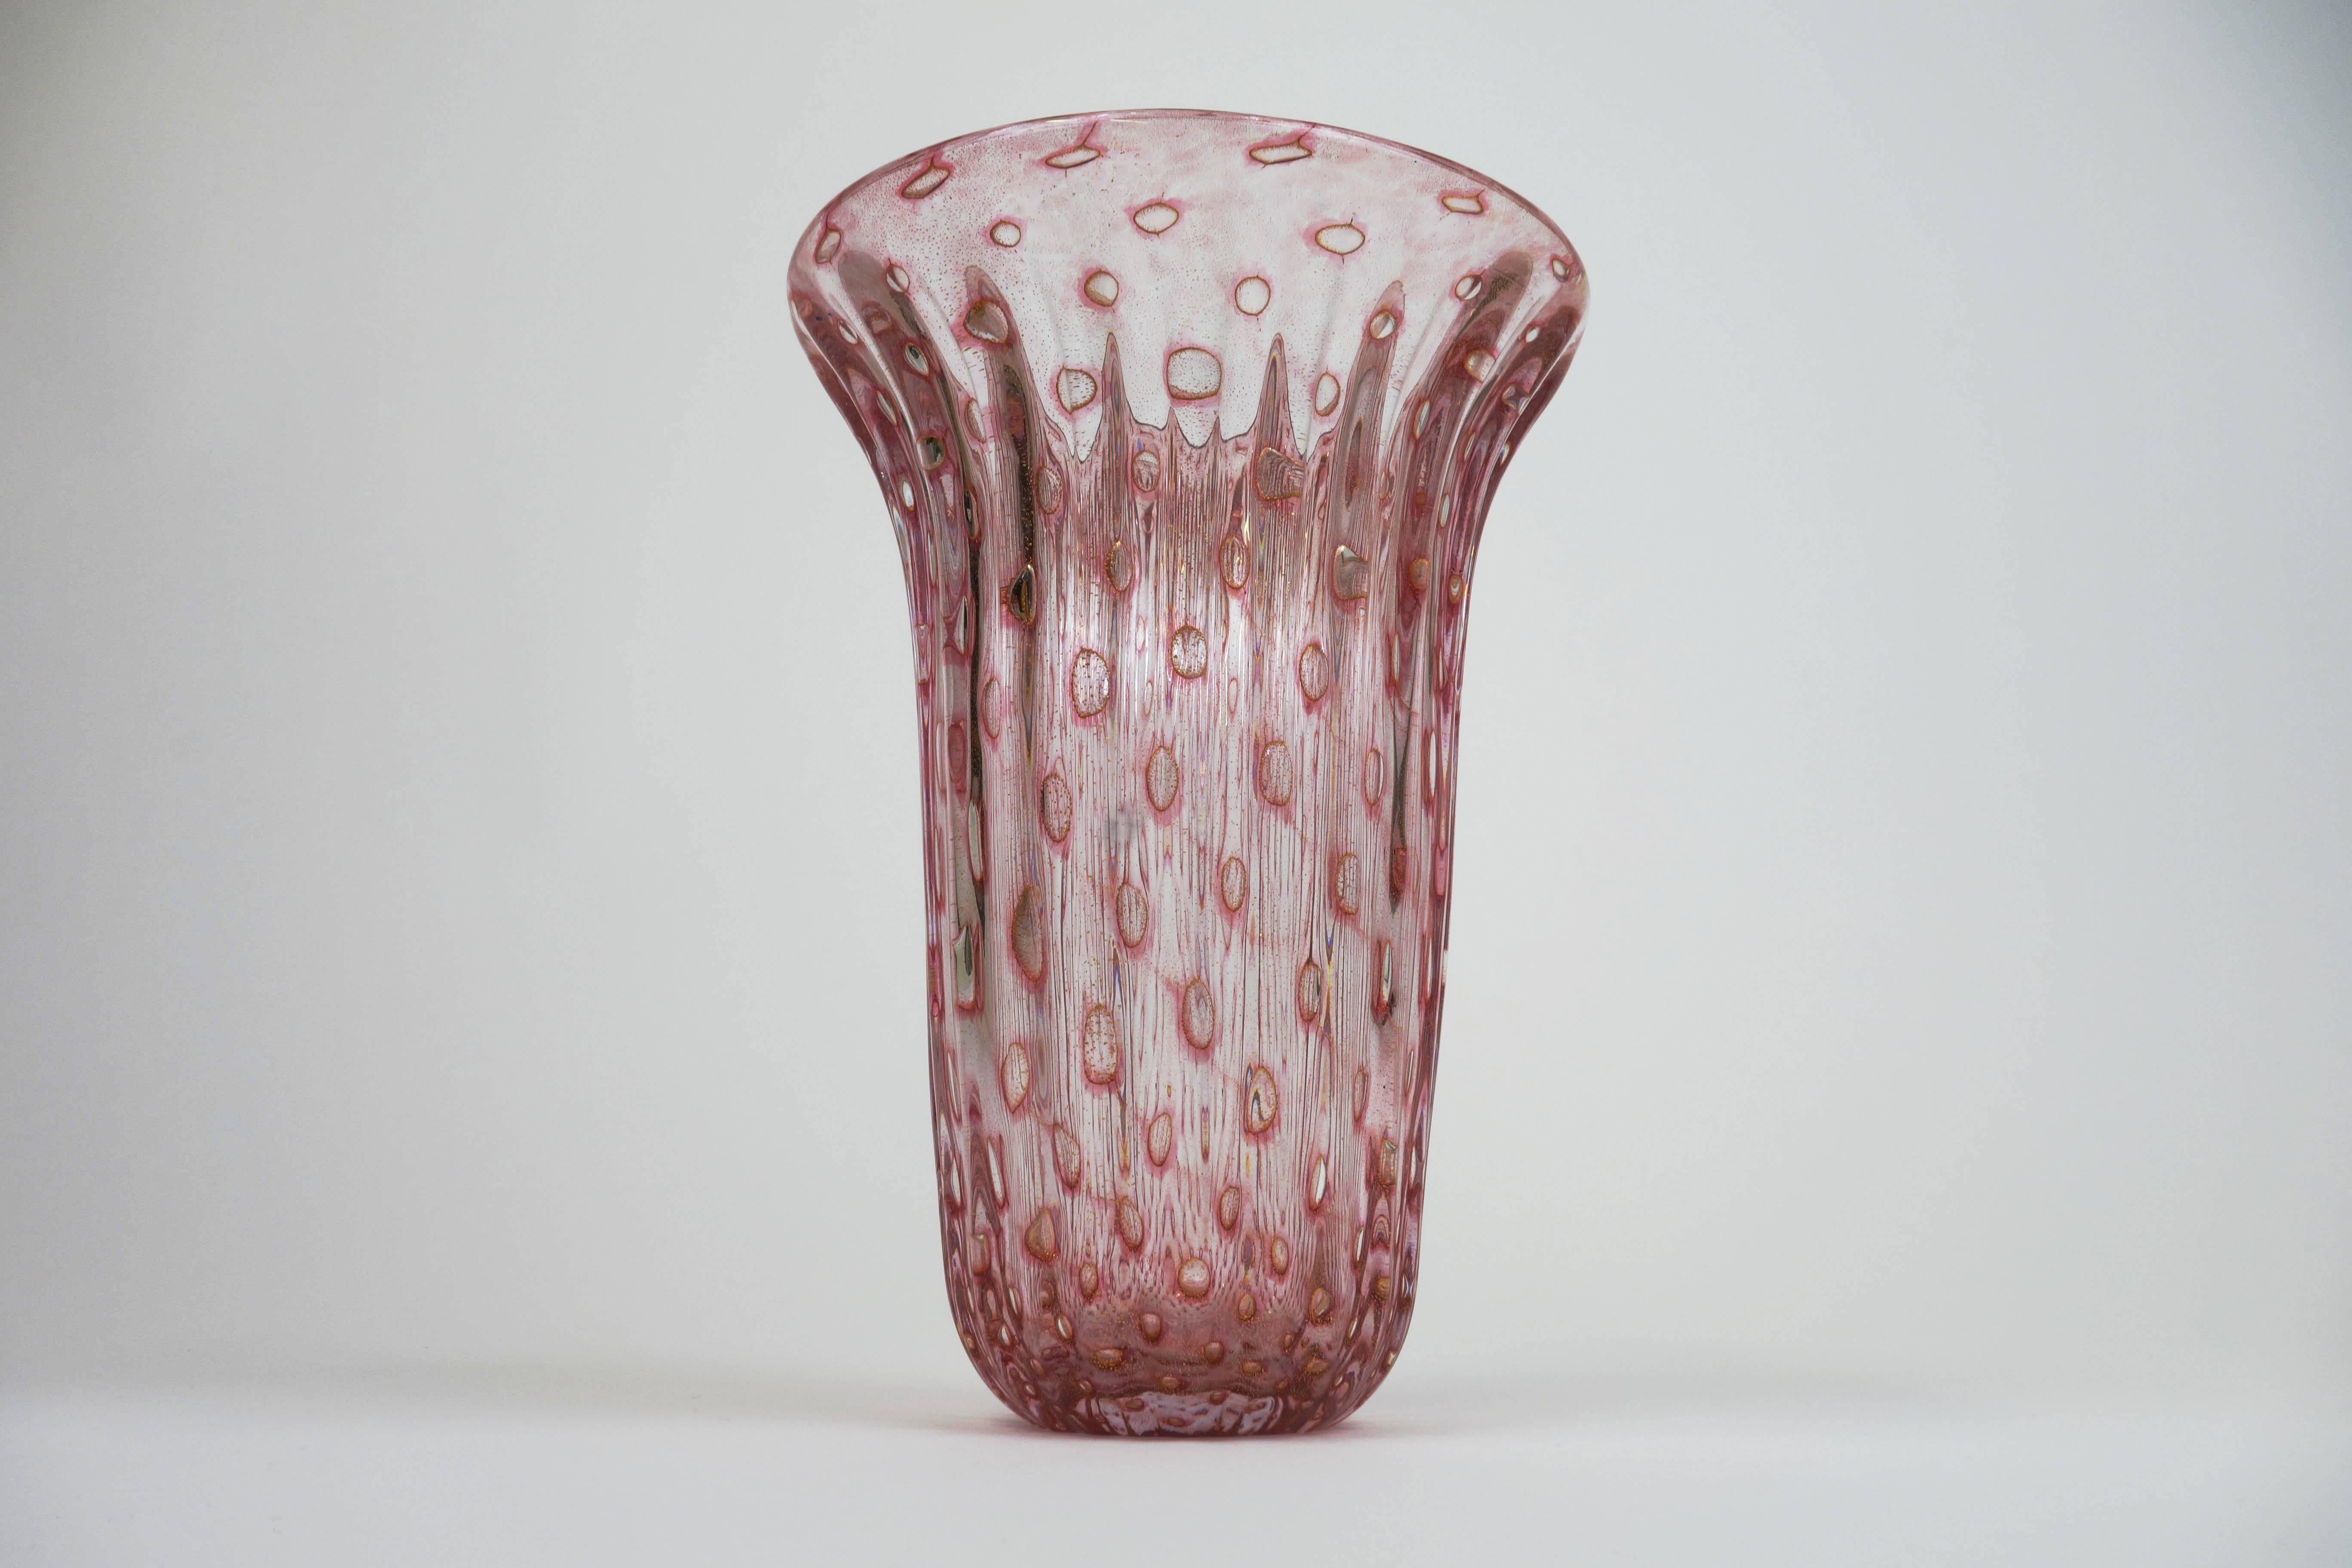 Mid-Century Modern Handblown Fluted Murano Glass Vase by Fratelli Toso, Murano, Italy, 1950s For Sale